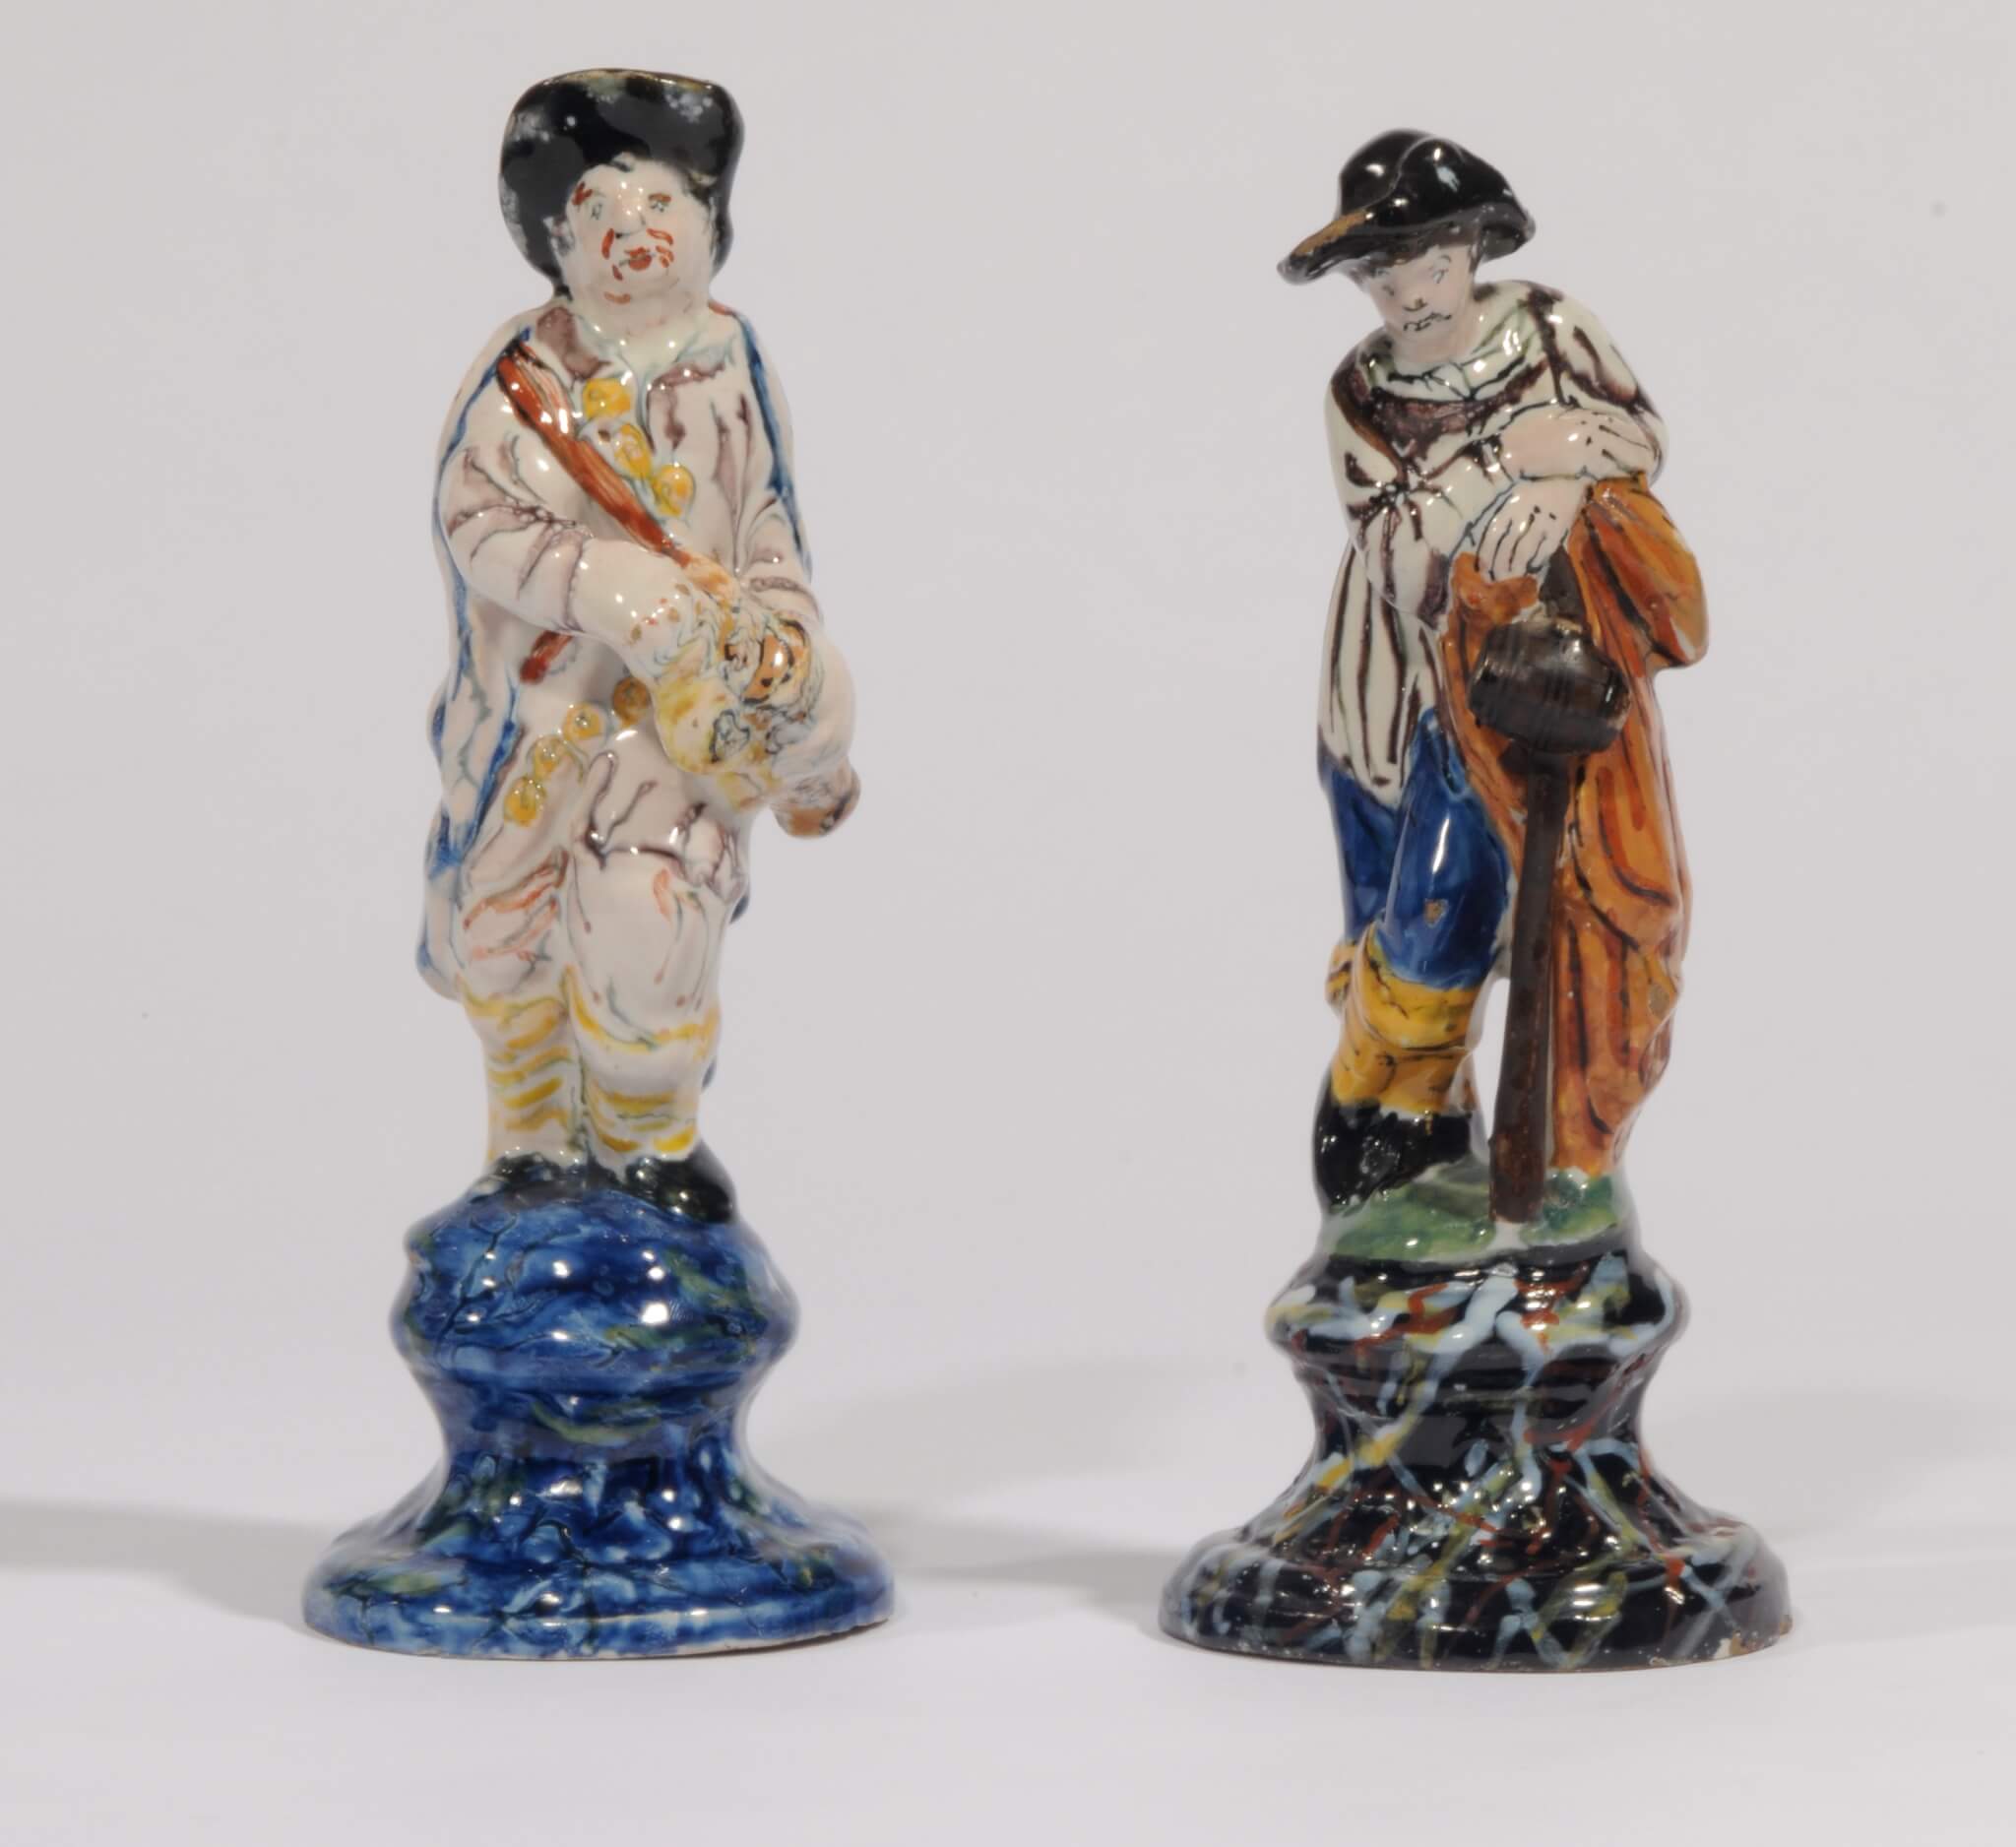 Antique Polychrome Figures of a Hurdy-Gurdy Player and a Shepherd